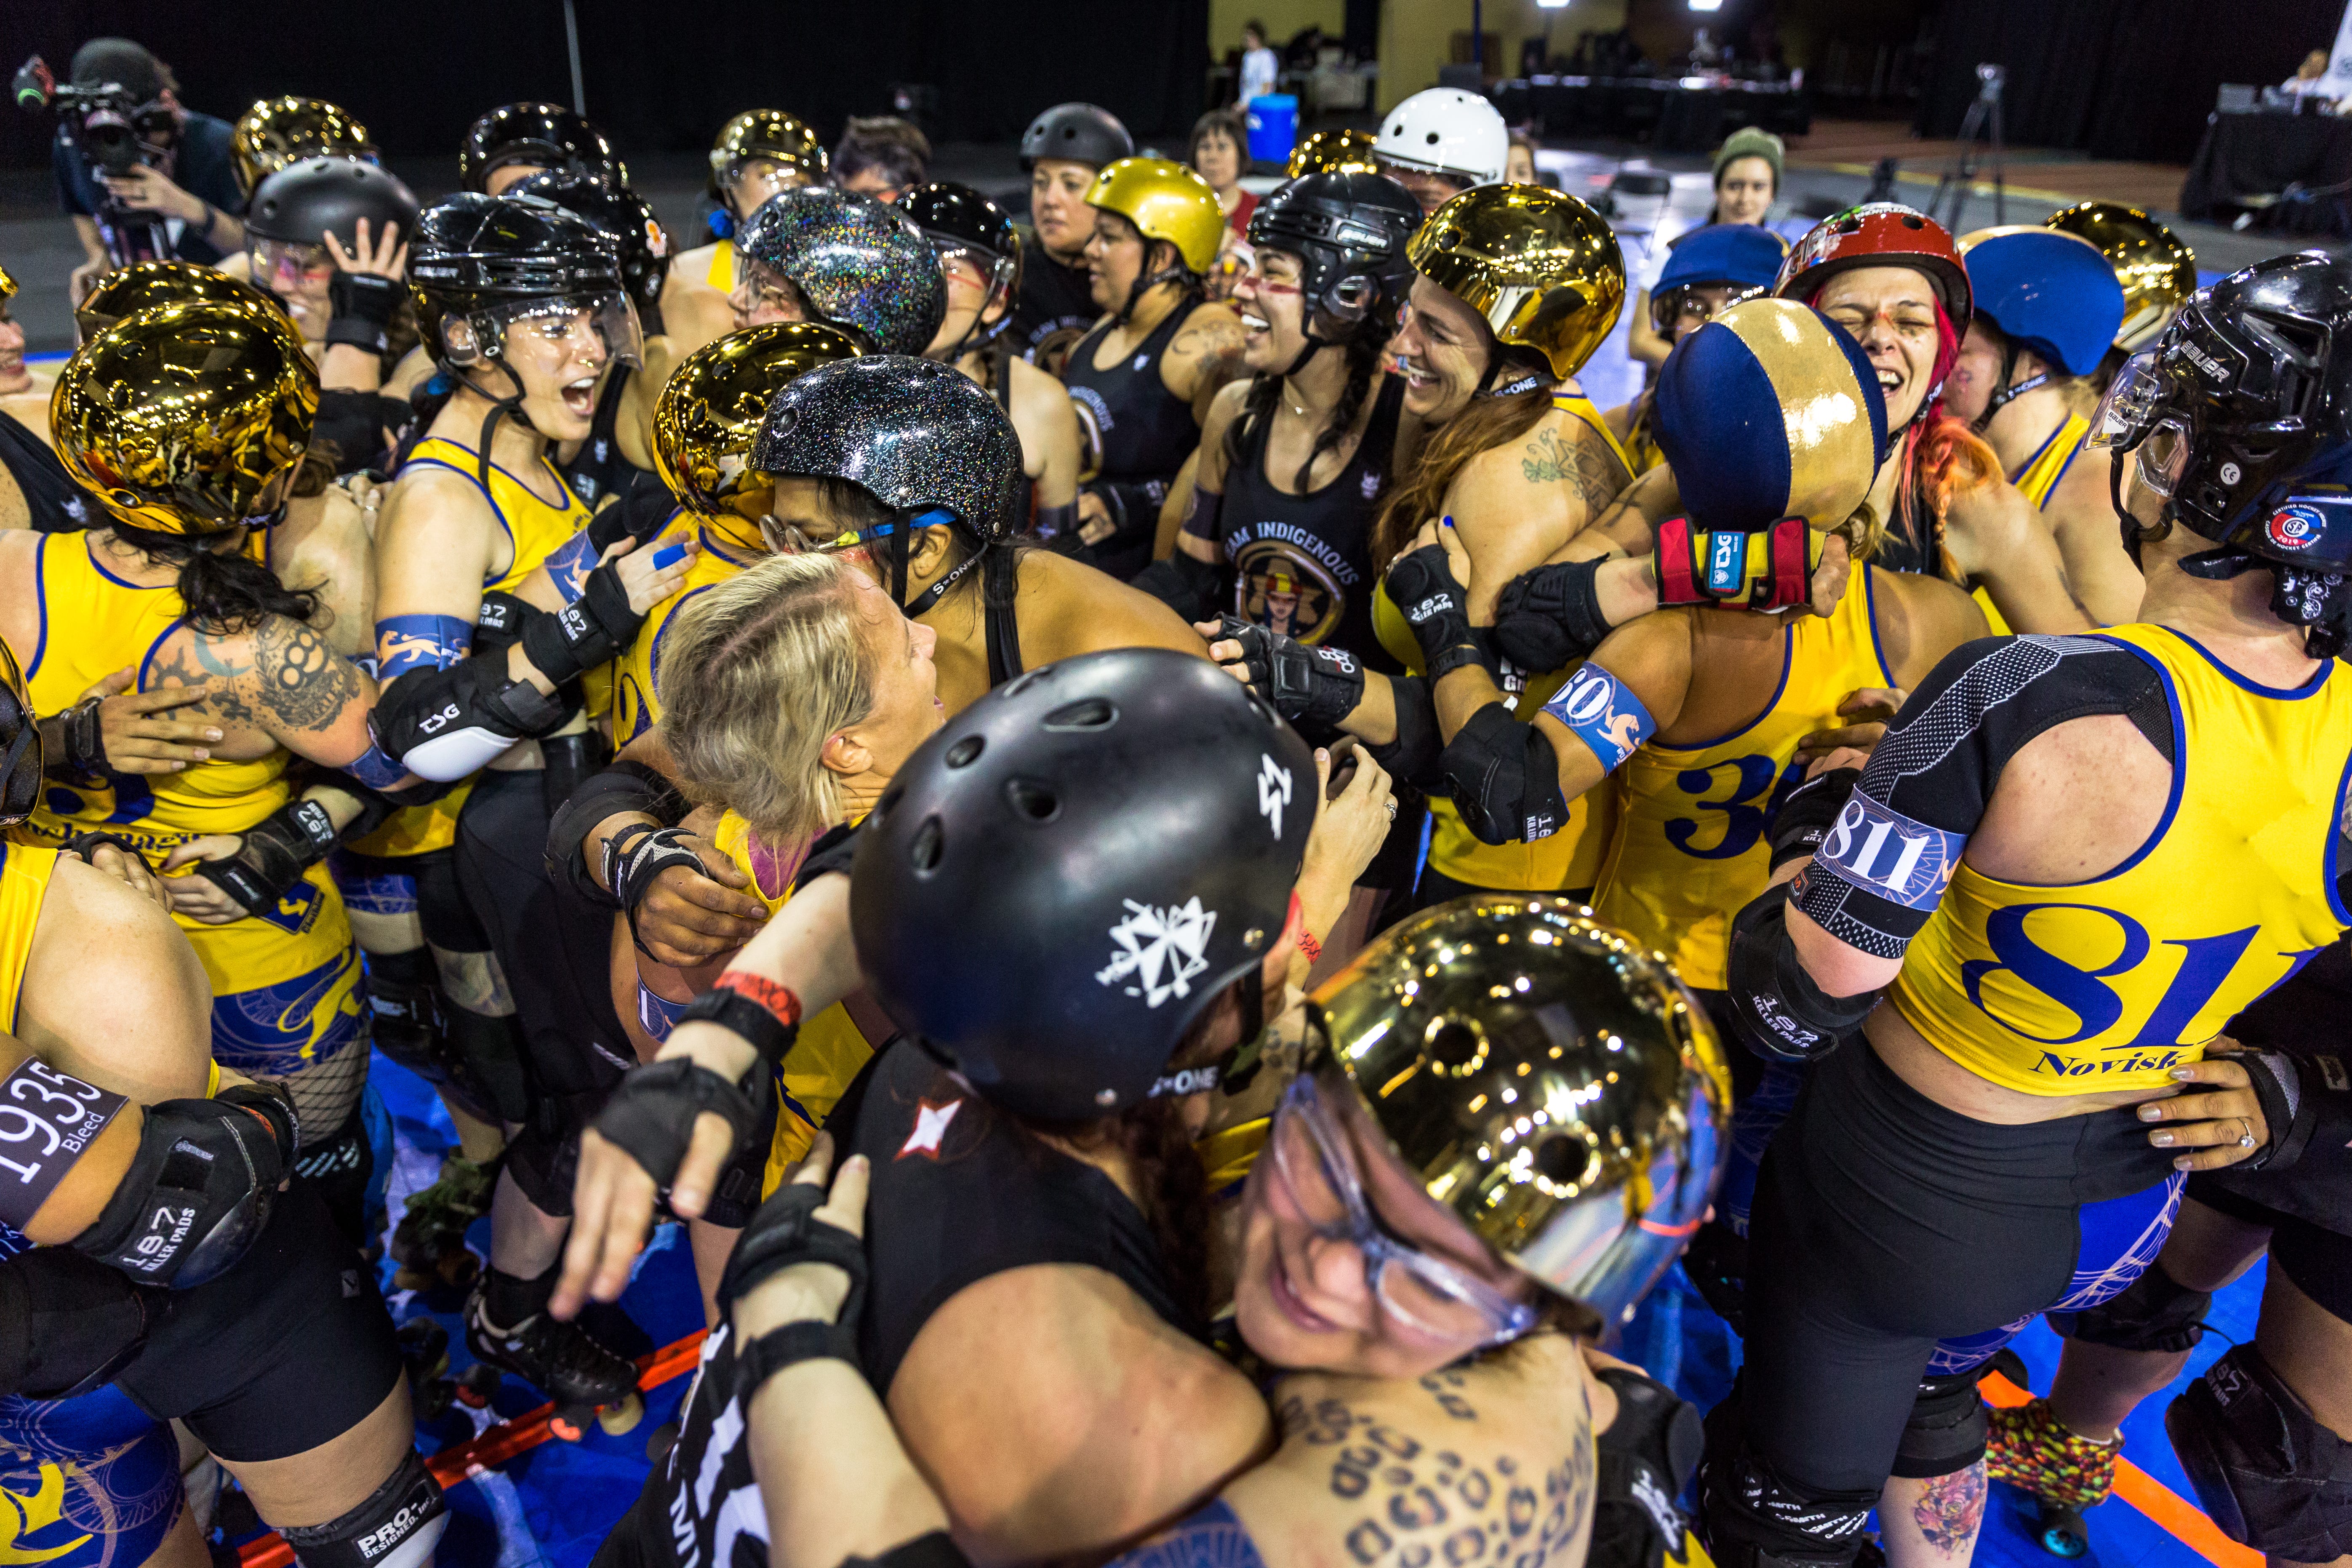 Game Without Borders Reconnecting Through Roller Derby by Barry Dredze The Apex pic